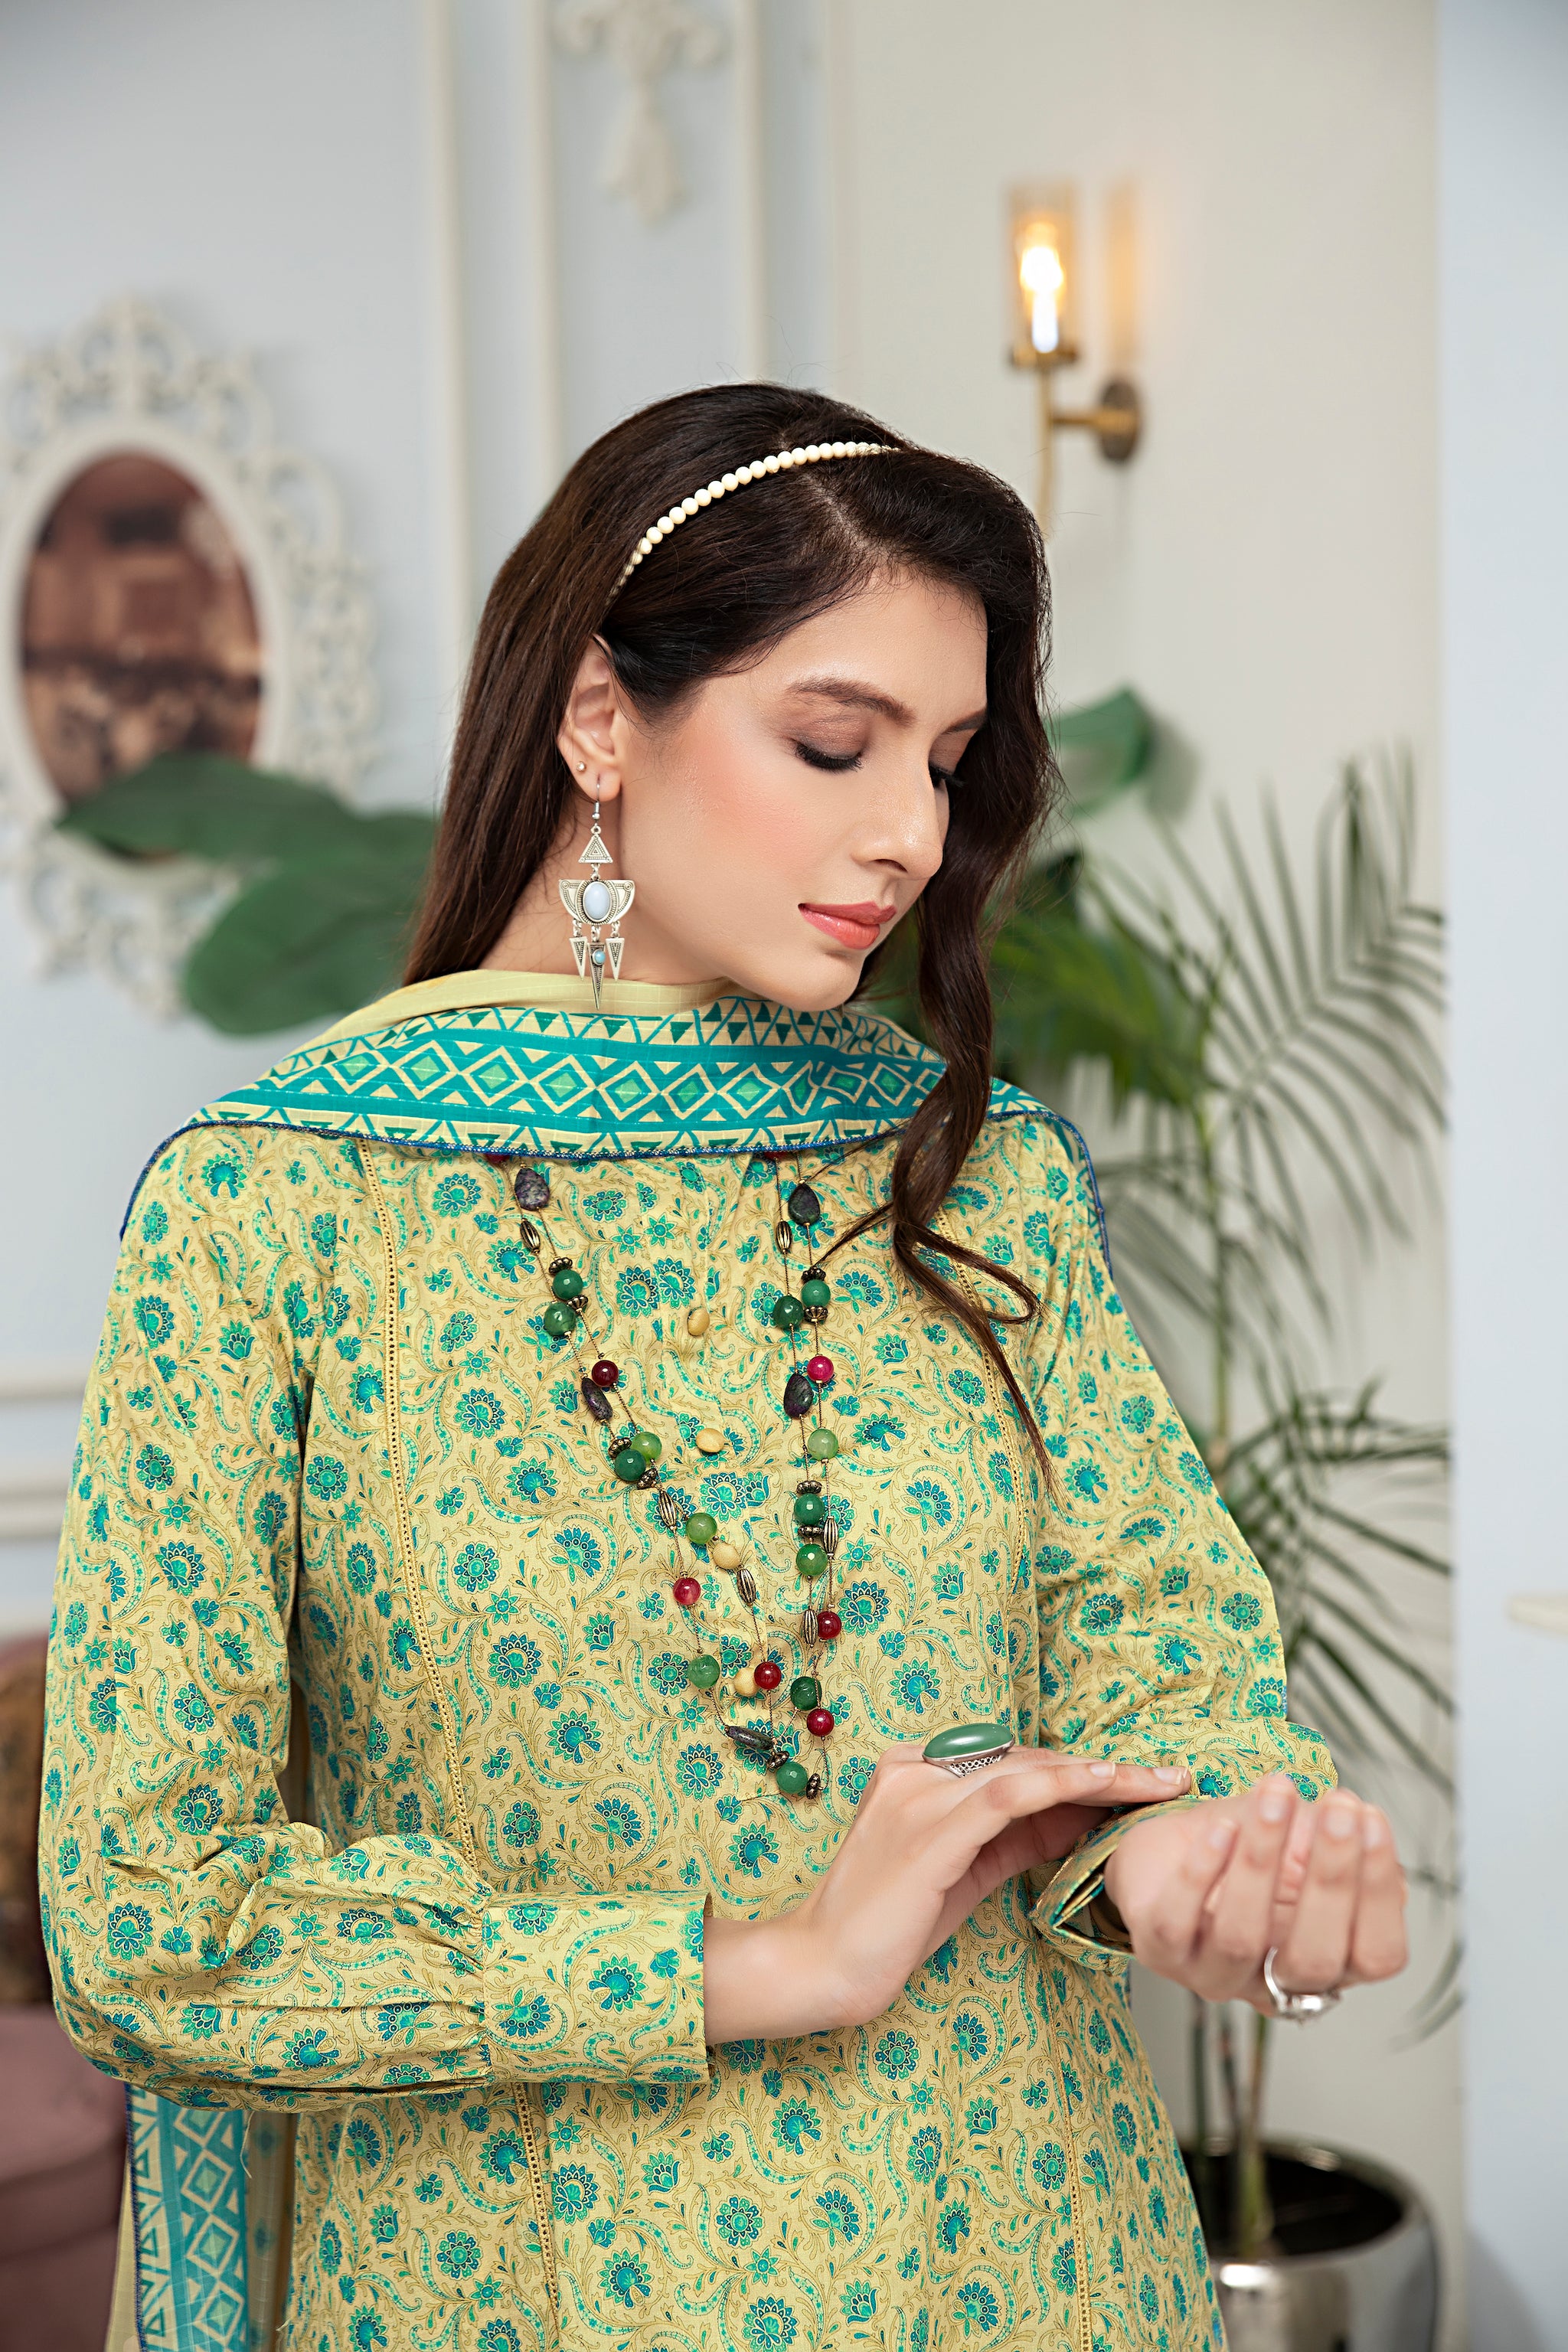 JAHAN AARA COLLECTION / 3PCS UNSTITCHED / PRINTED LAWN SUIT SUMMER 24' BY SAFANOOR